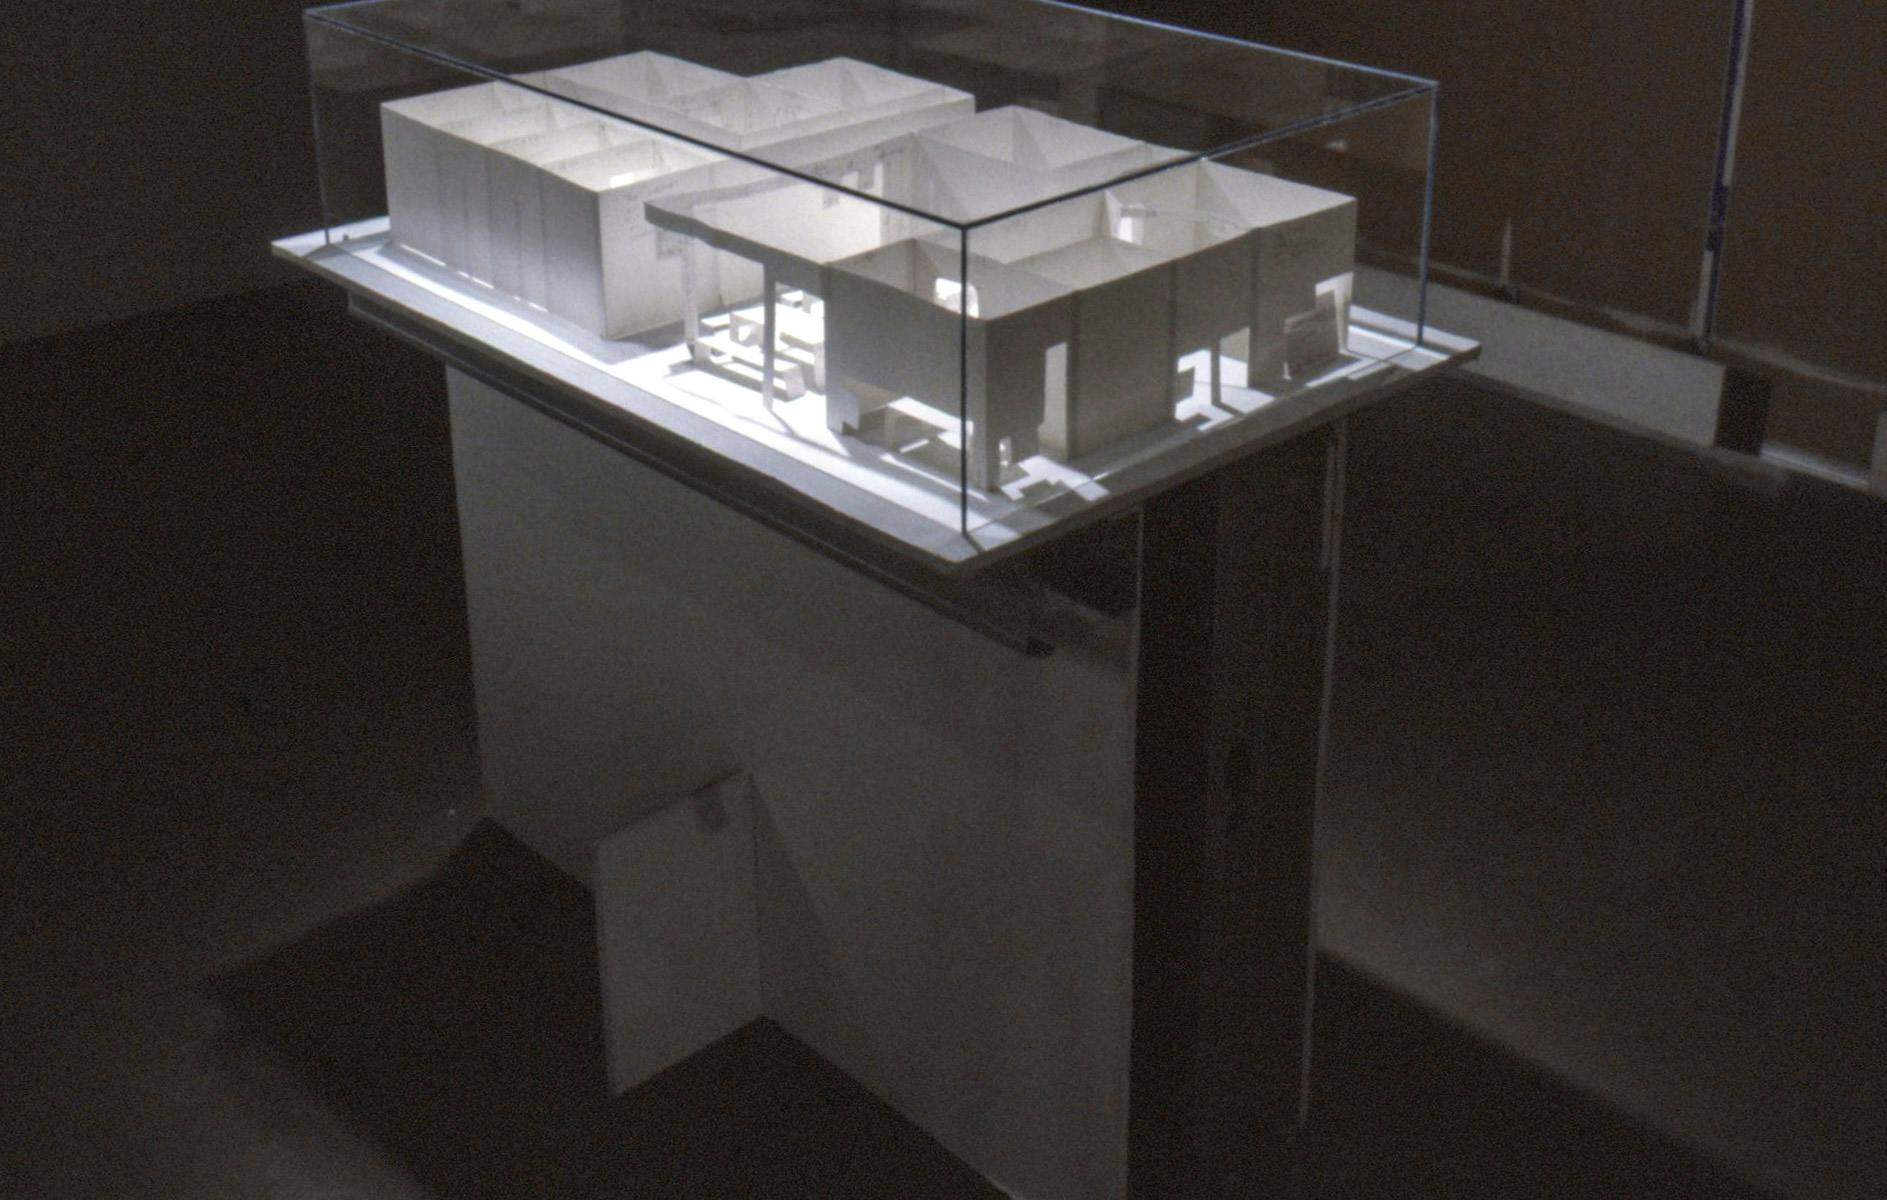 In a darkened gallery space, a white mockup of an architecture complex is displayed. This sculpture sits on a part of a white wall which has been removed from one of the galley walls.  